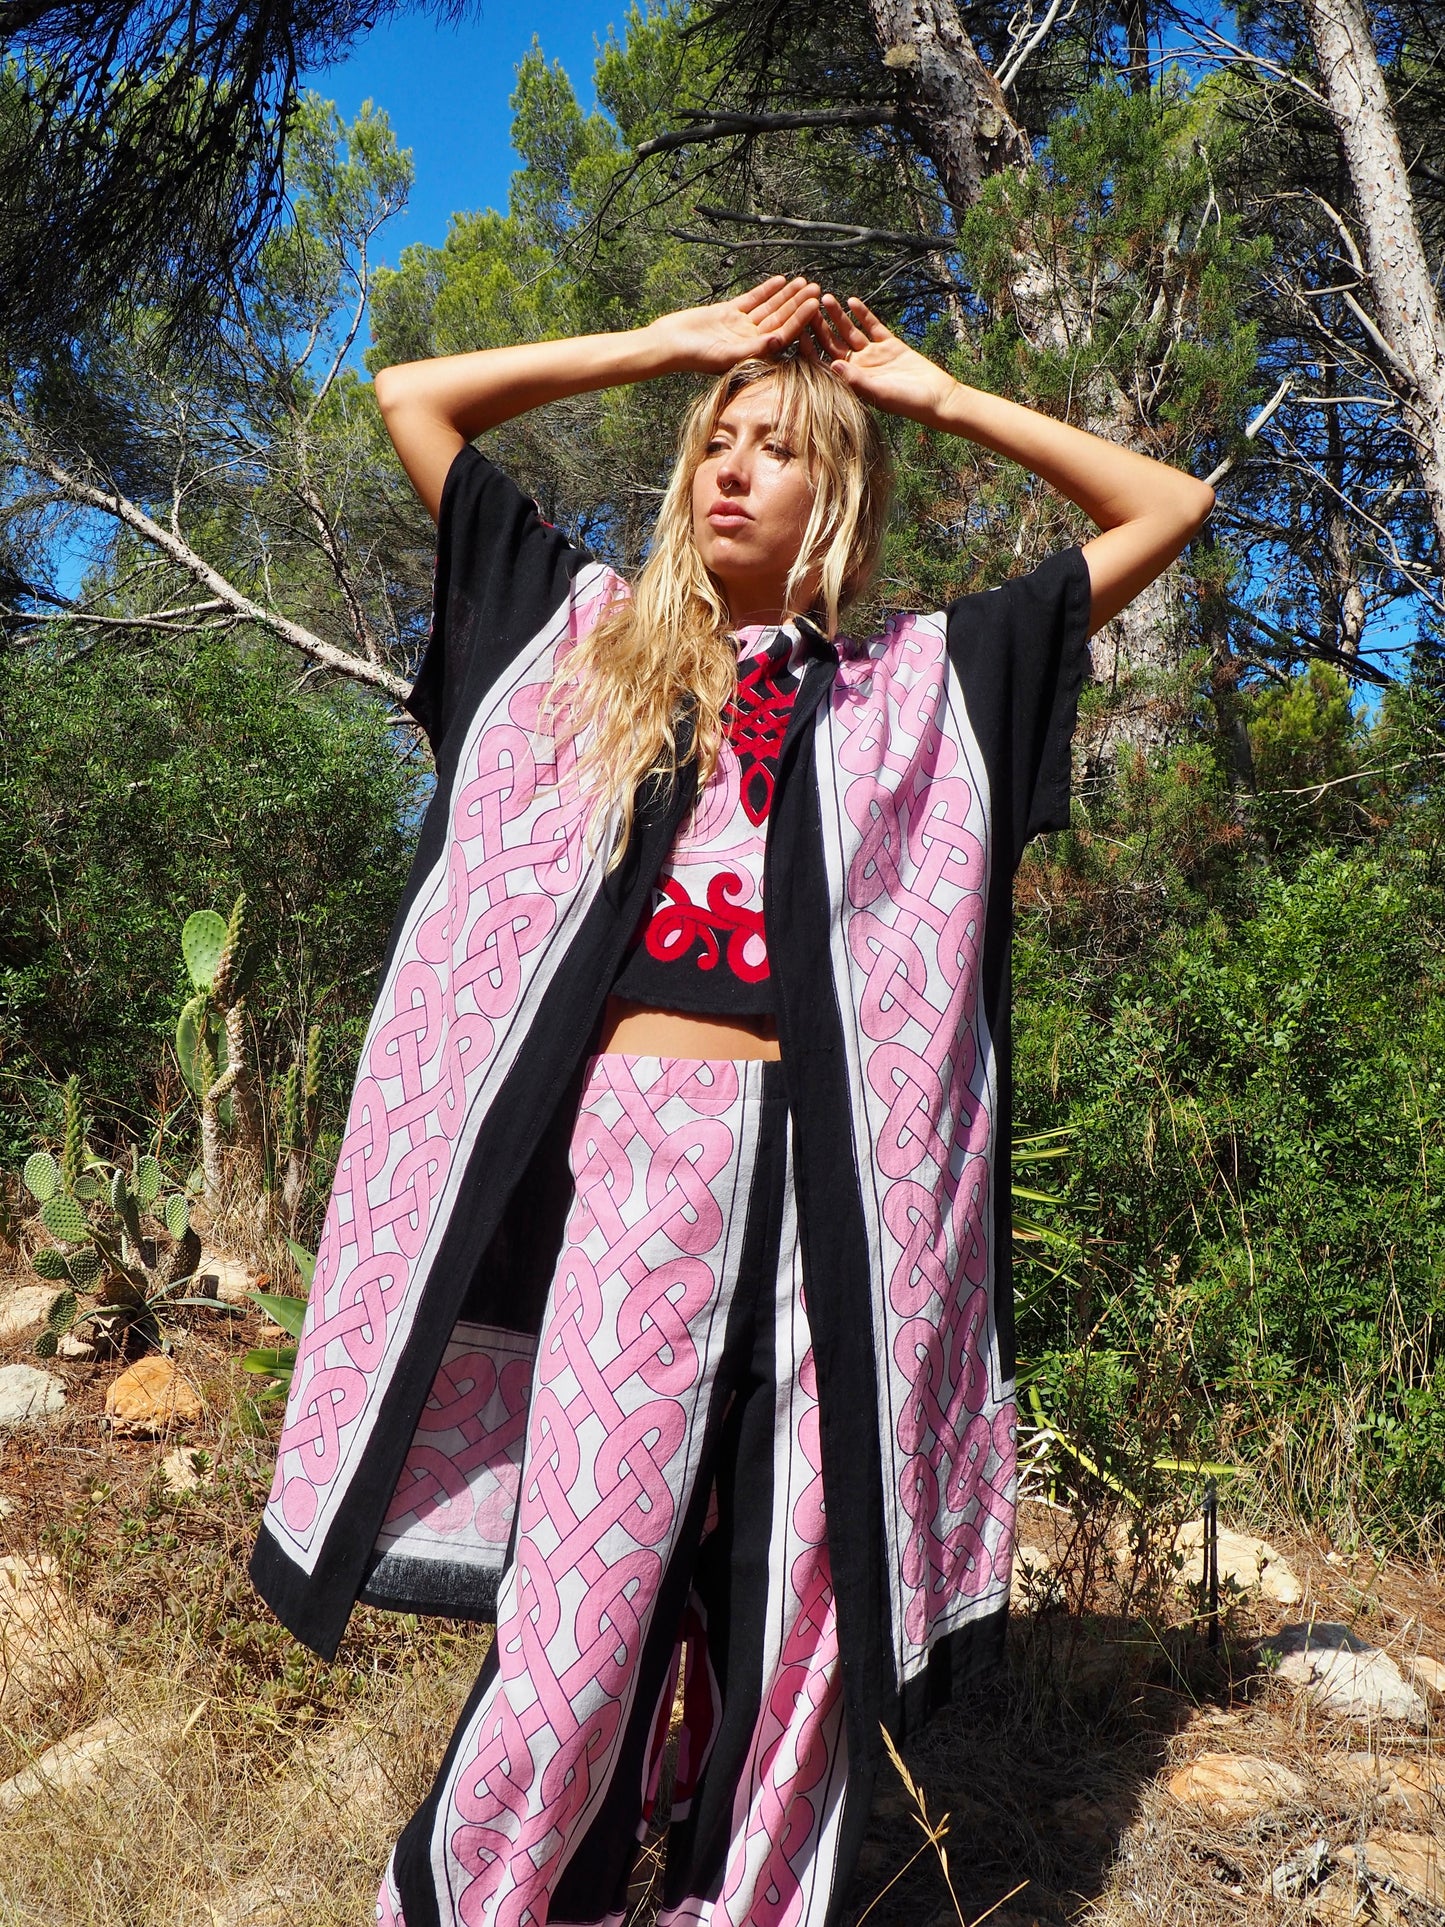 Up-cycled cotton short sleeve kimono jacket in pink and black with vibrant print design and circular motifs by Vagabond Ibiza